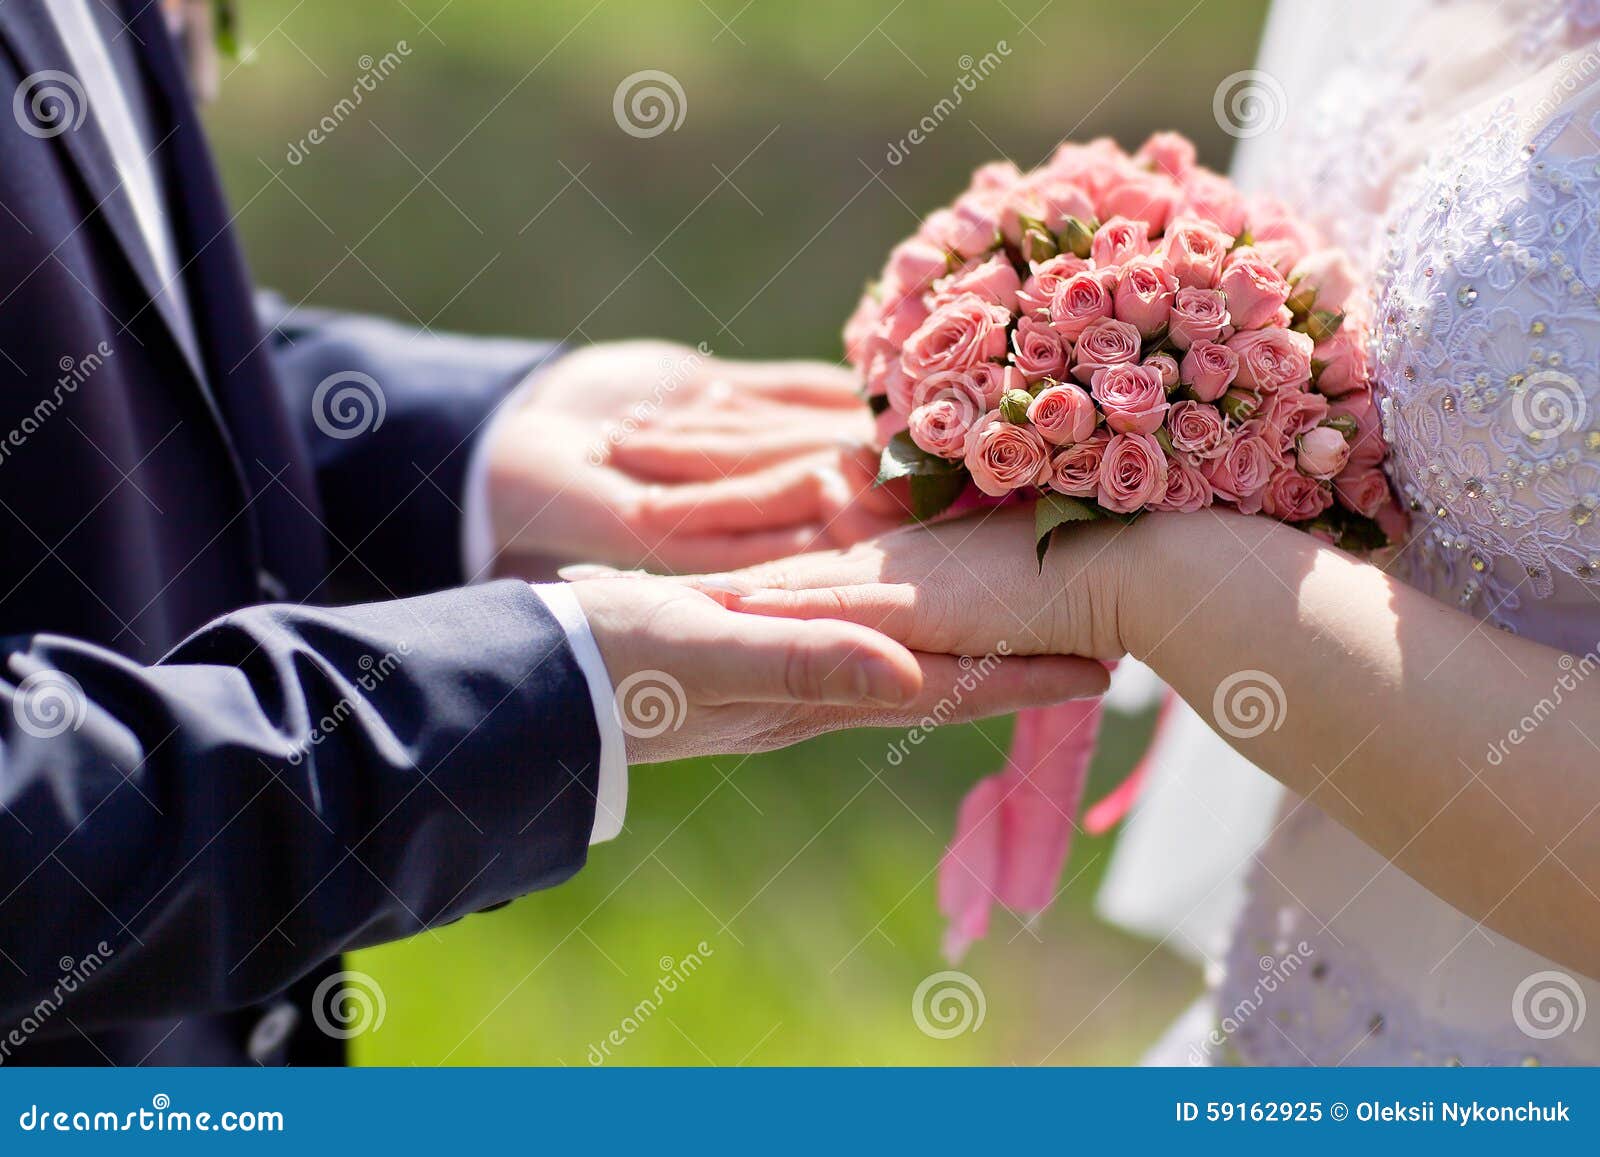 Hands of Bride and Groom Holding a Bouquet of Pink Roses Stock Image ...